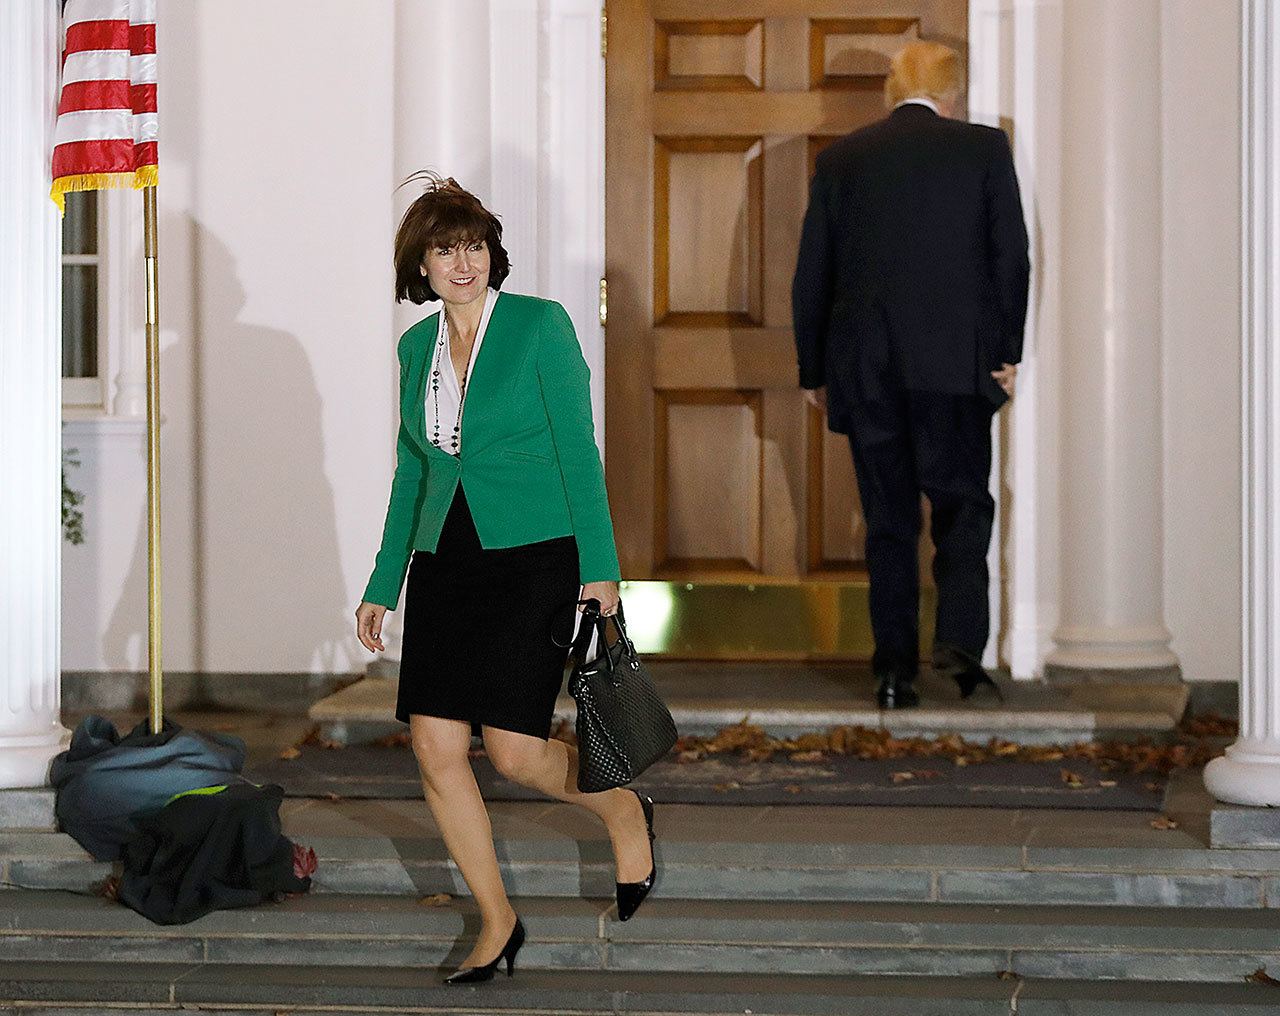 Rep. Cathy McMorris Rodgers, R-Wash., left, leaves as President-elect Donald Trump walks into the Trump National Golf Club Bedminster clubhouse Sunday, Nov. 20, 2016, in Bedminster, N.J.. (AP Photo/Carolyn Kaster)